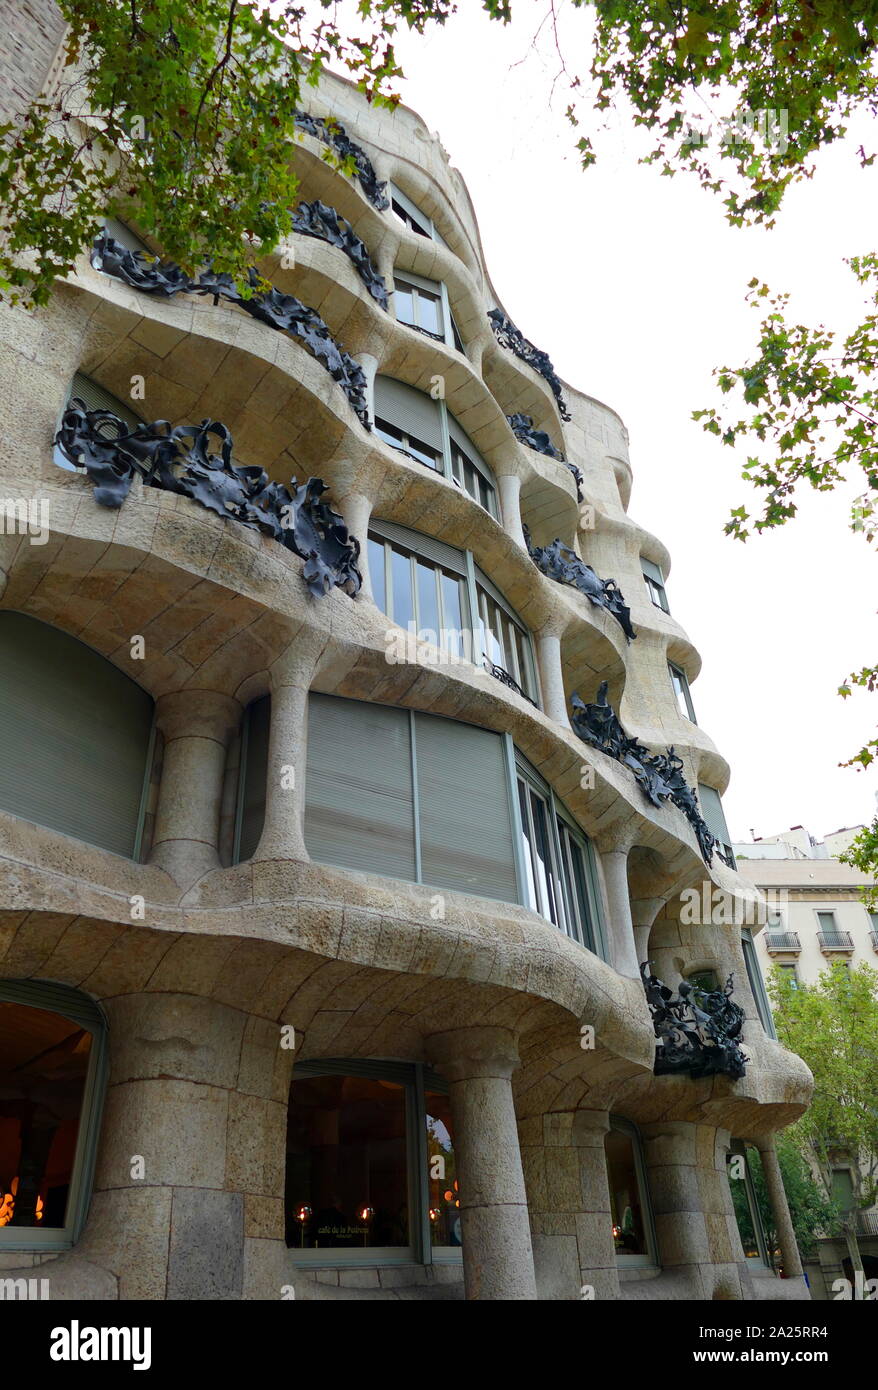 Casa Mila (La Pedrera), modernist building in Barcelona, Catalonia, Spain. It was the last private residence designed by architect Antoni Gaudi and was built between 1906 and 1912. Stock Photo